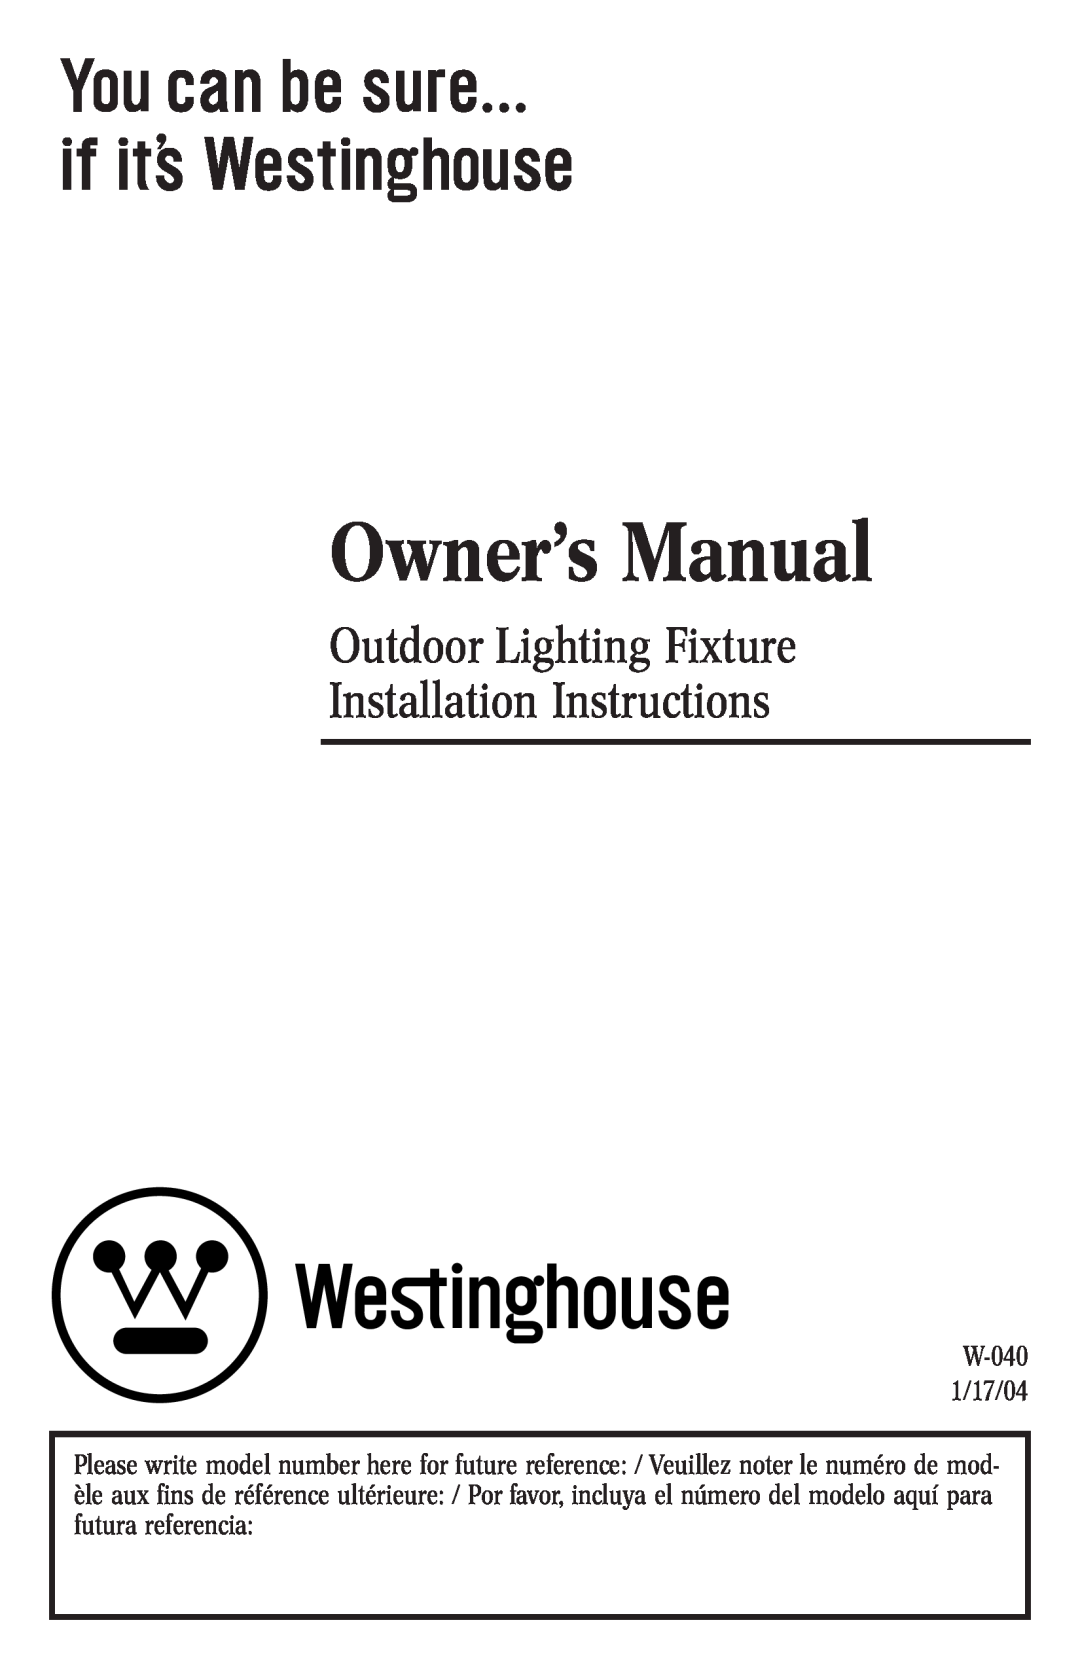 Westinghouse w-040 owner manual Outdoor Lighting Fixture, Installation Instructions 